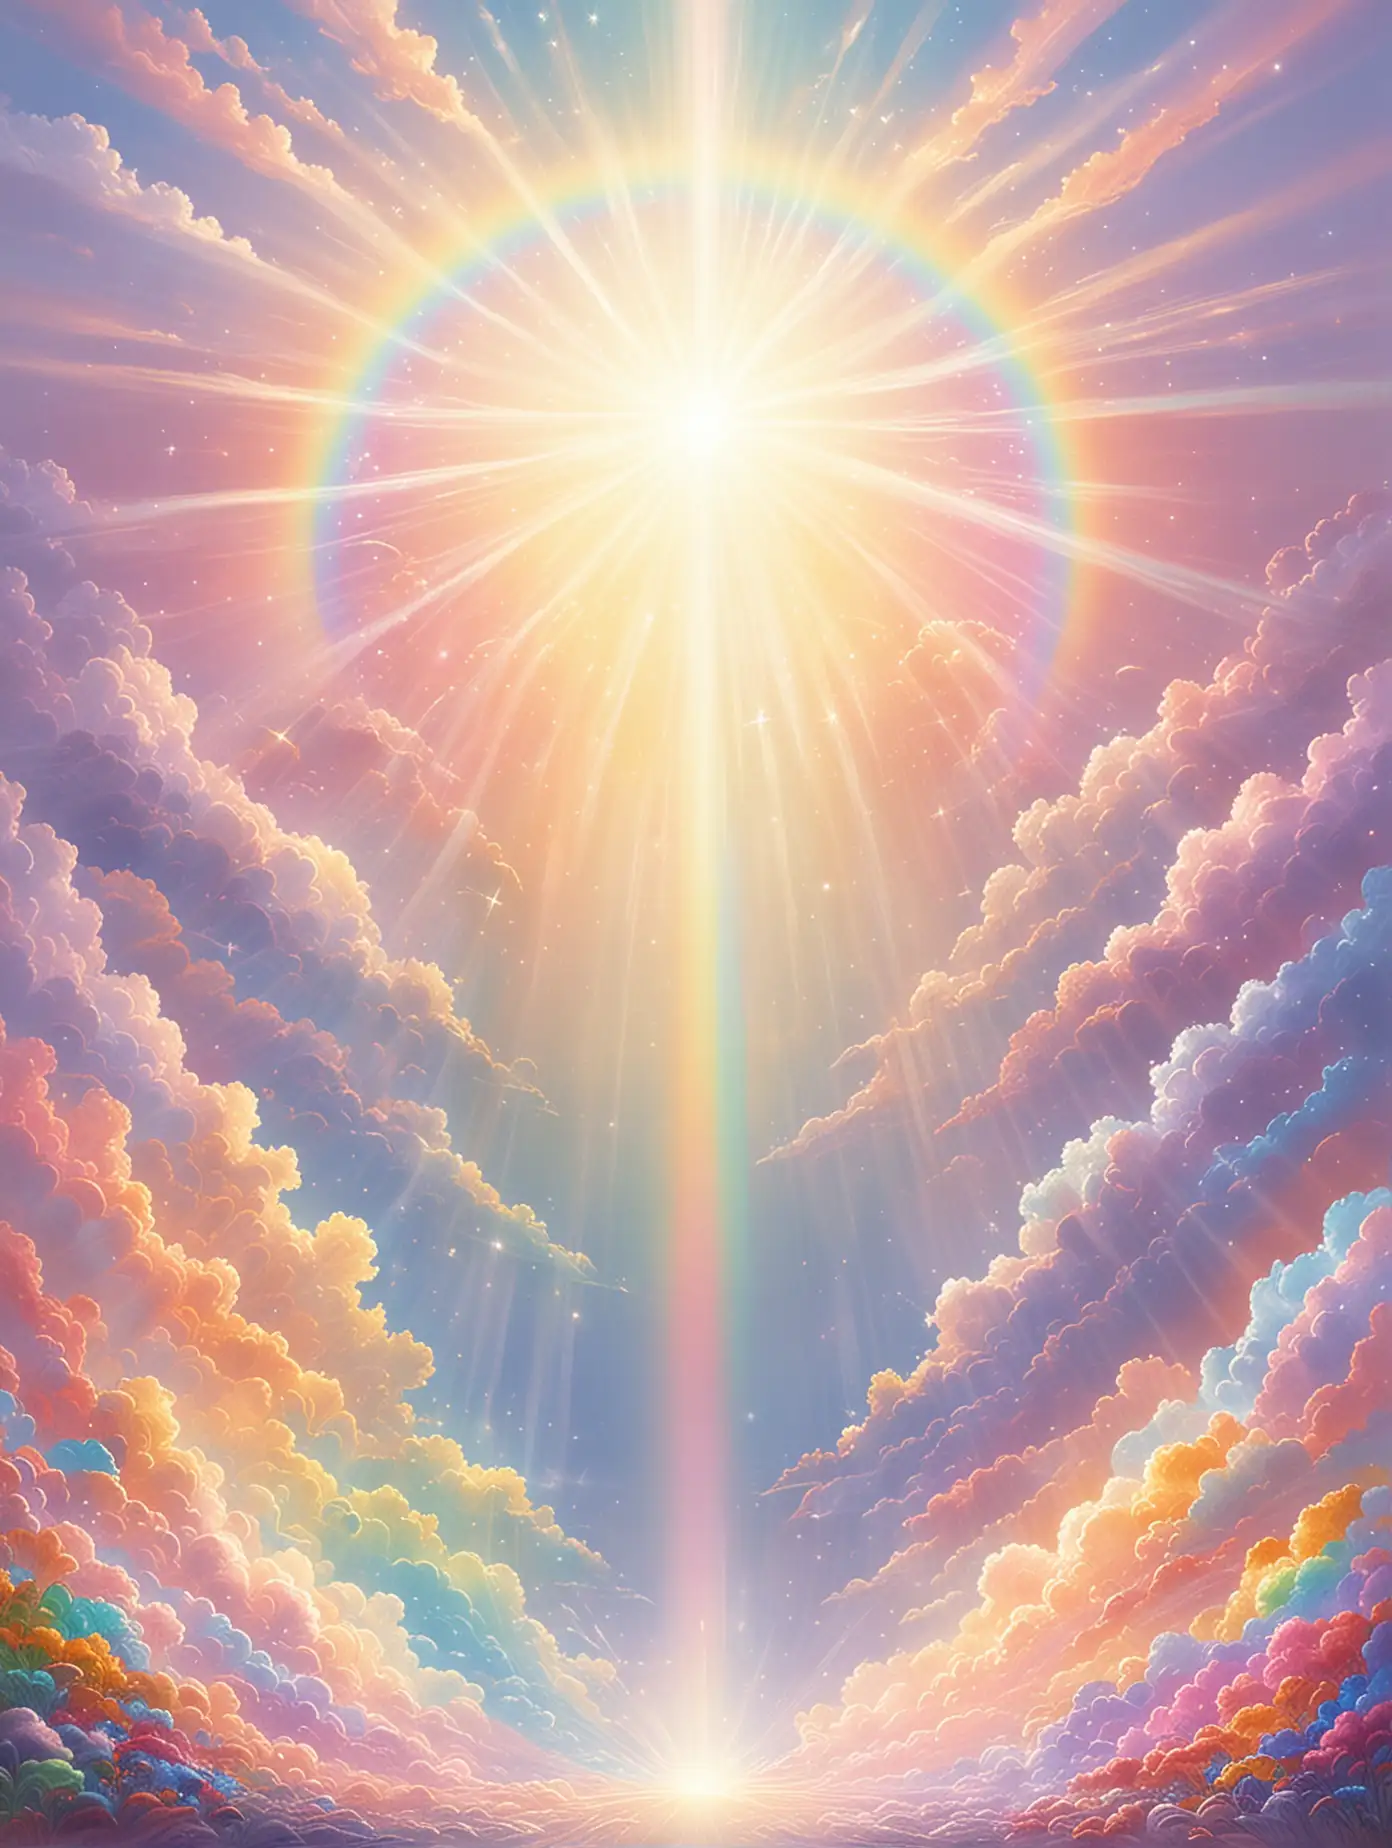 please create a pastel rainbow transcendent sparkly artwork of divine love, light, sunshine, and rainbow rays coming out of the sun.